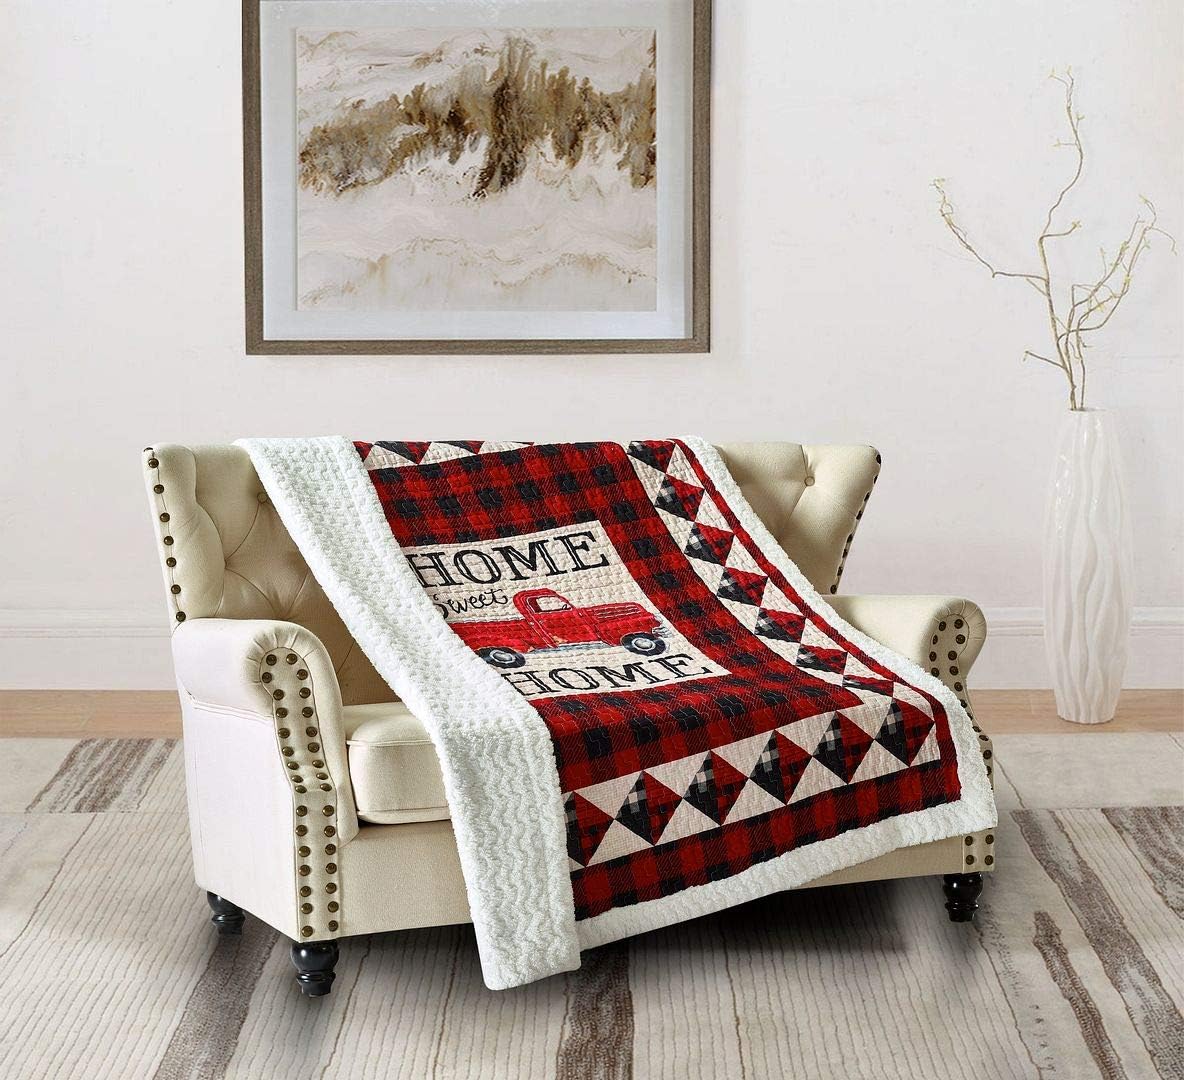 Virah Bella Quilted Country Sherpa Throw Blanket for Couch - 50" x 60" - Red Truck Home Sweet Home Plush Blanket